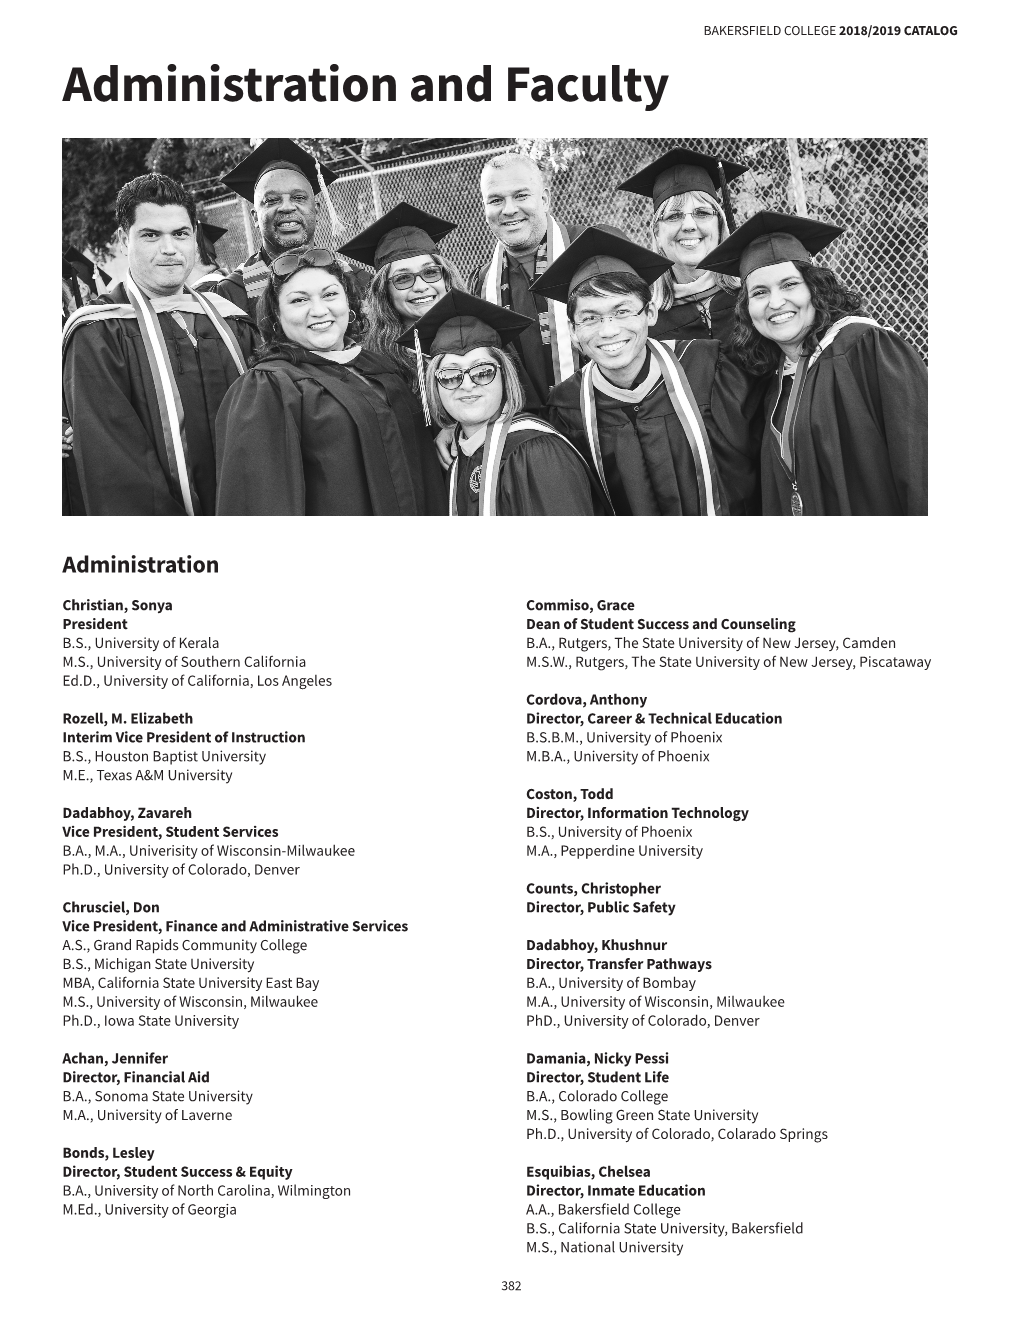 Administration and Faculty | Bakersfield College Catalog 2018-2019